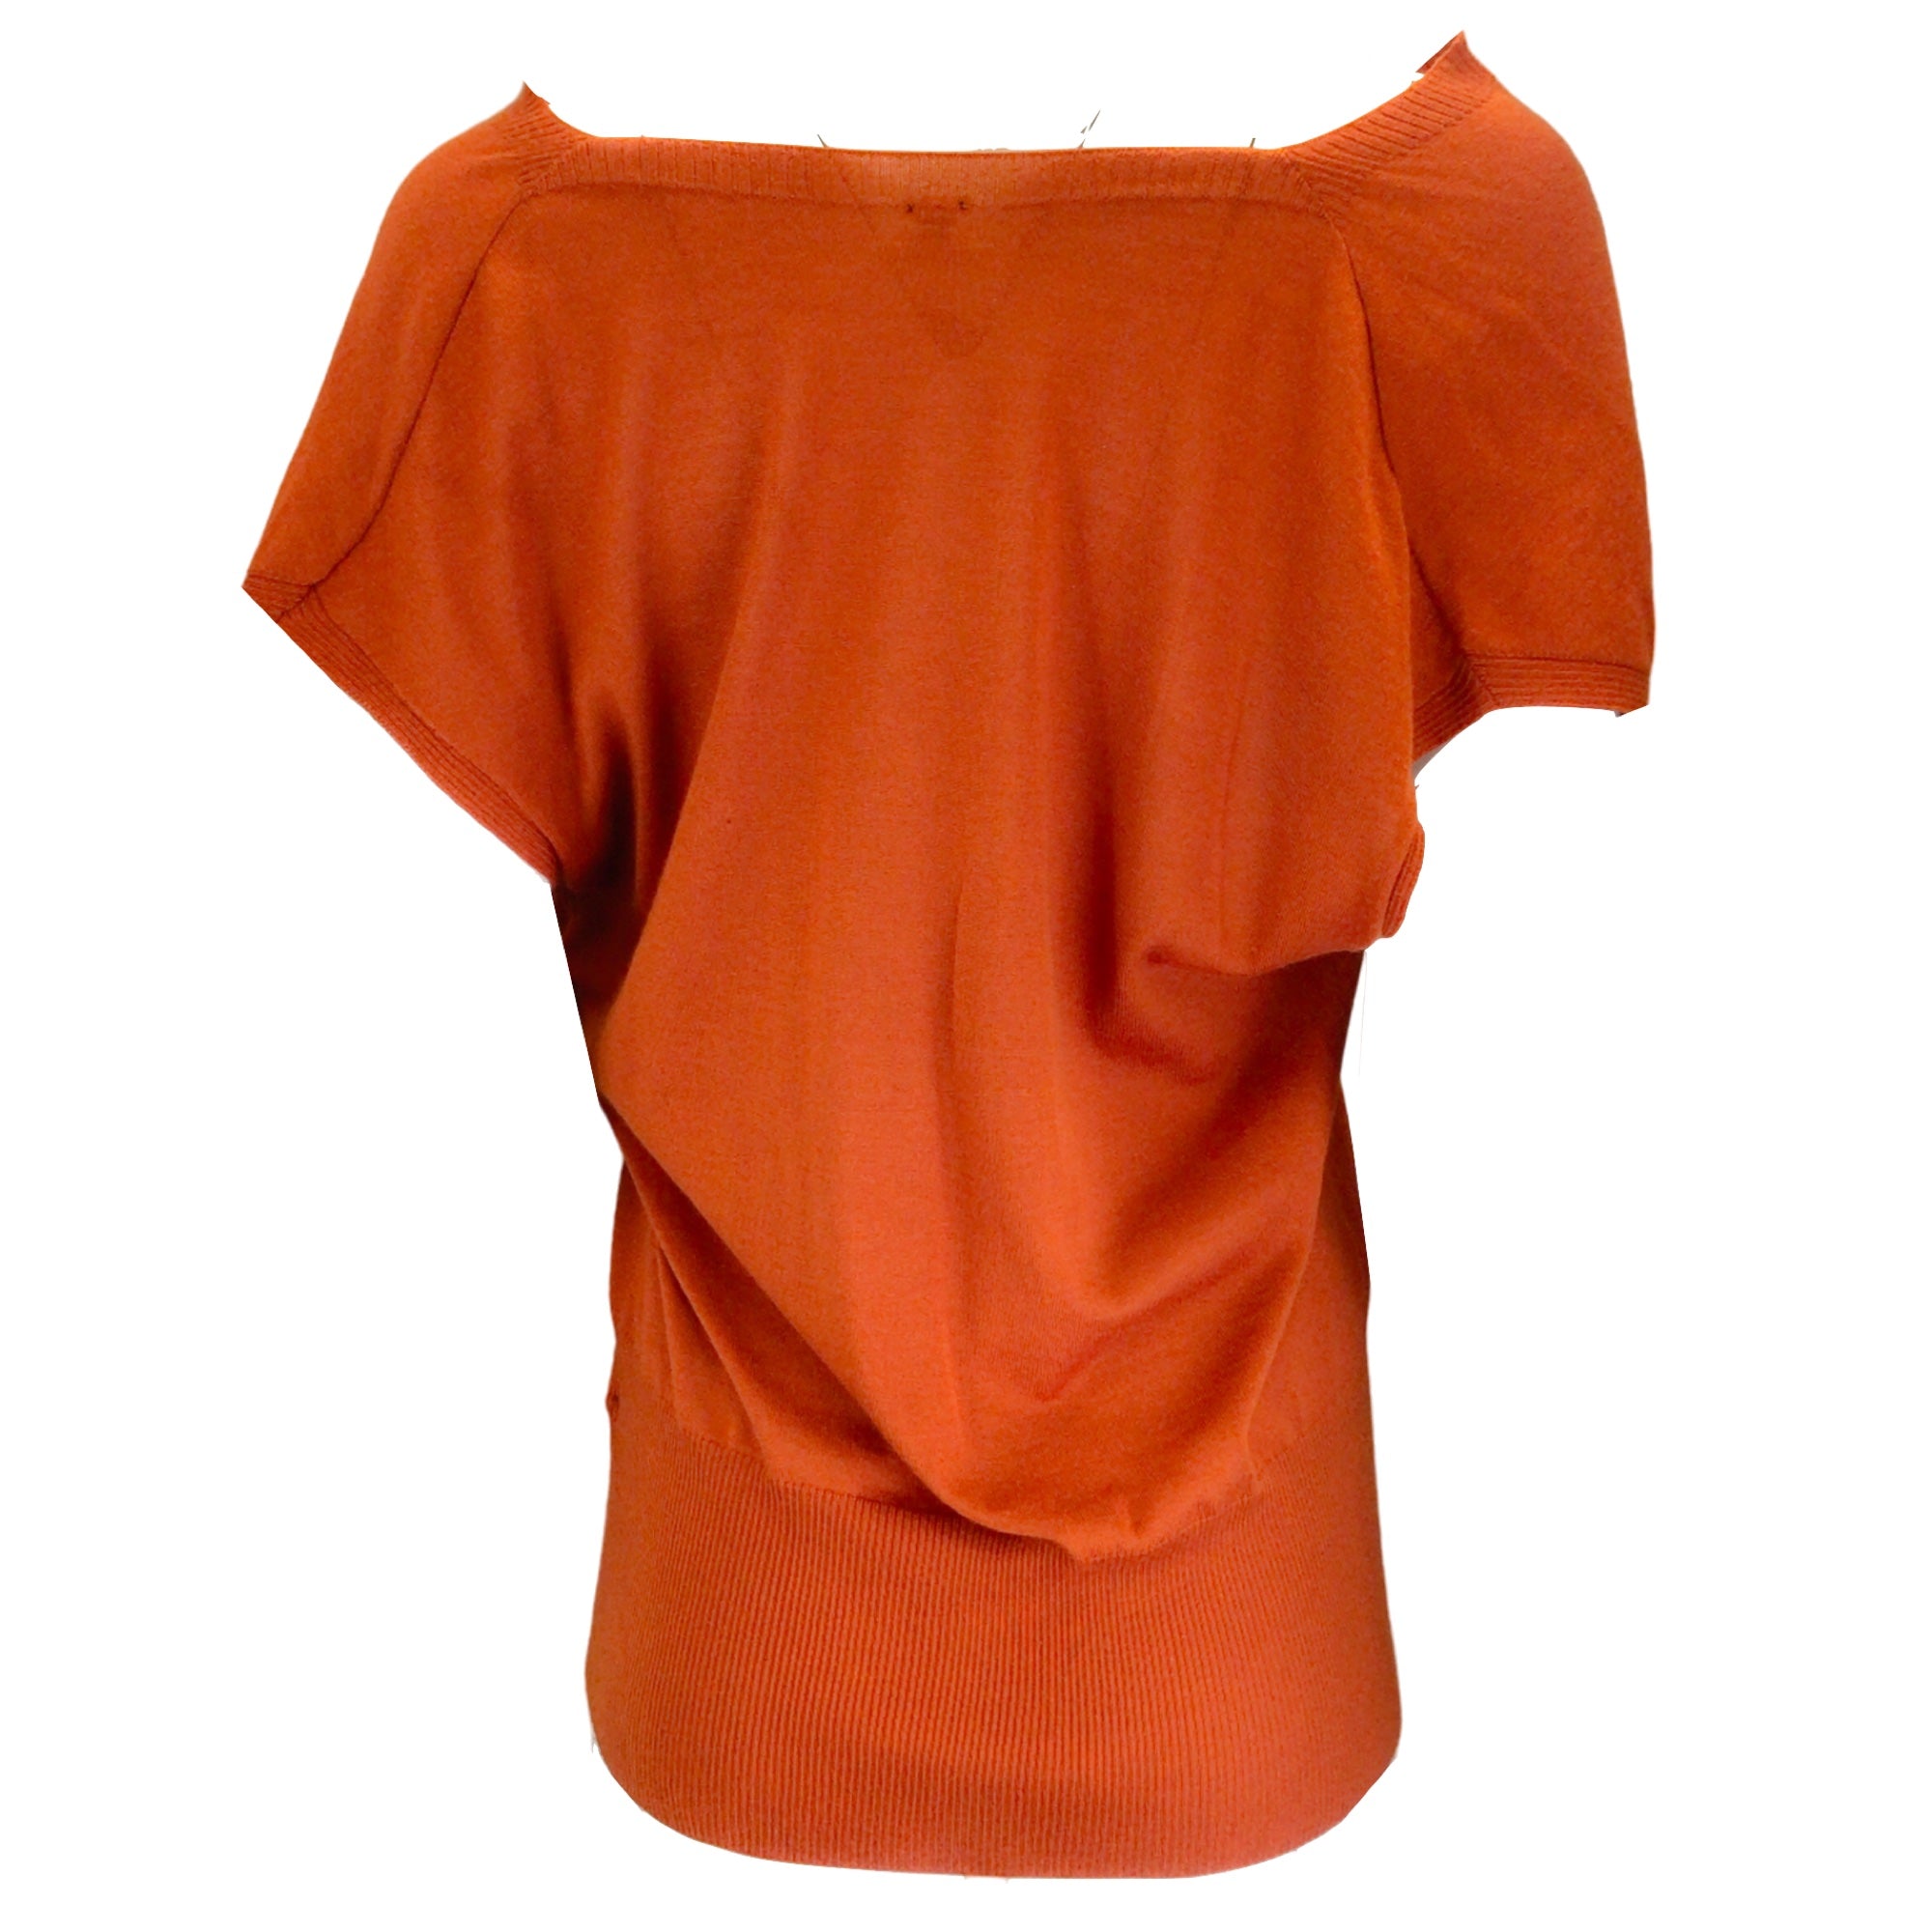 Hermes Orange Cashmere and Silk Knit Pullover Sweater